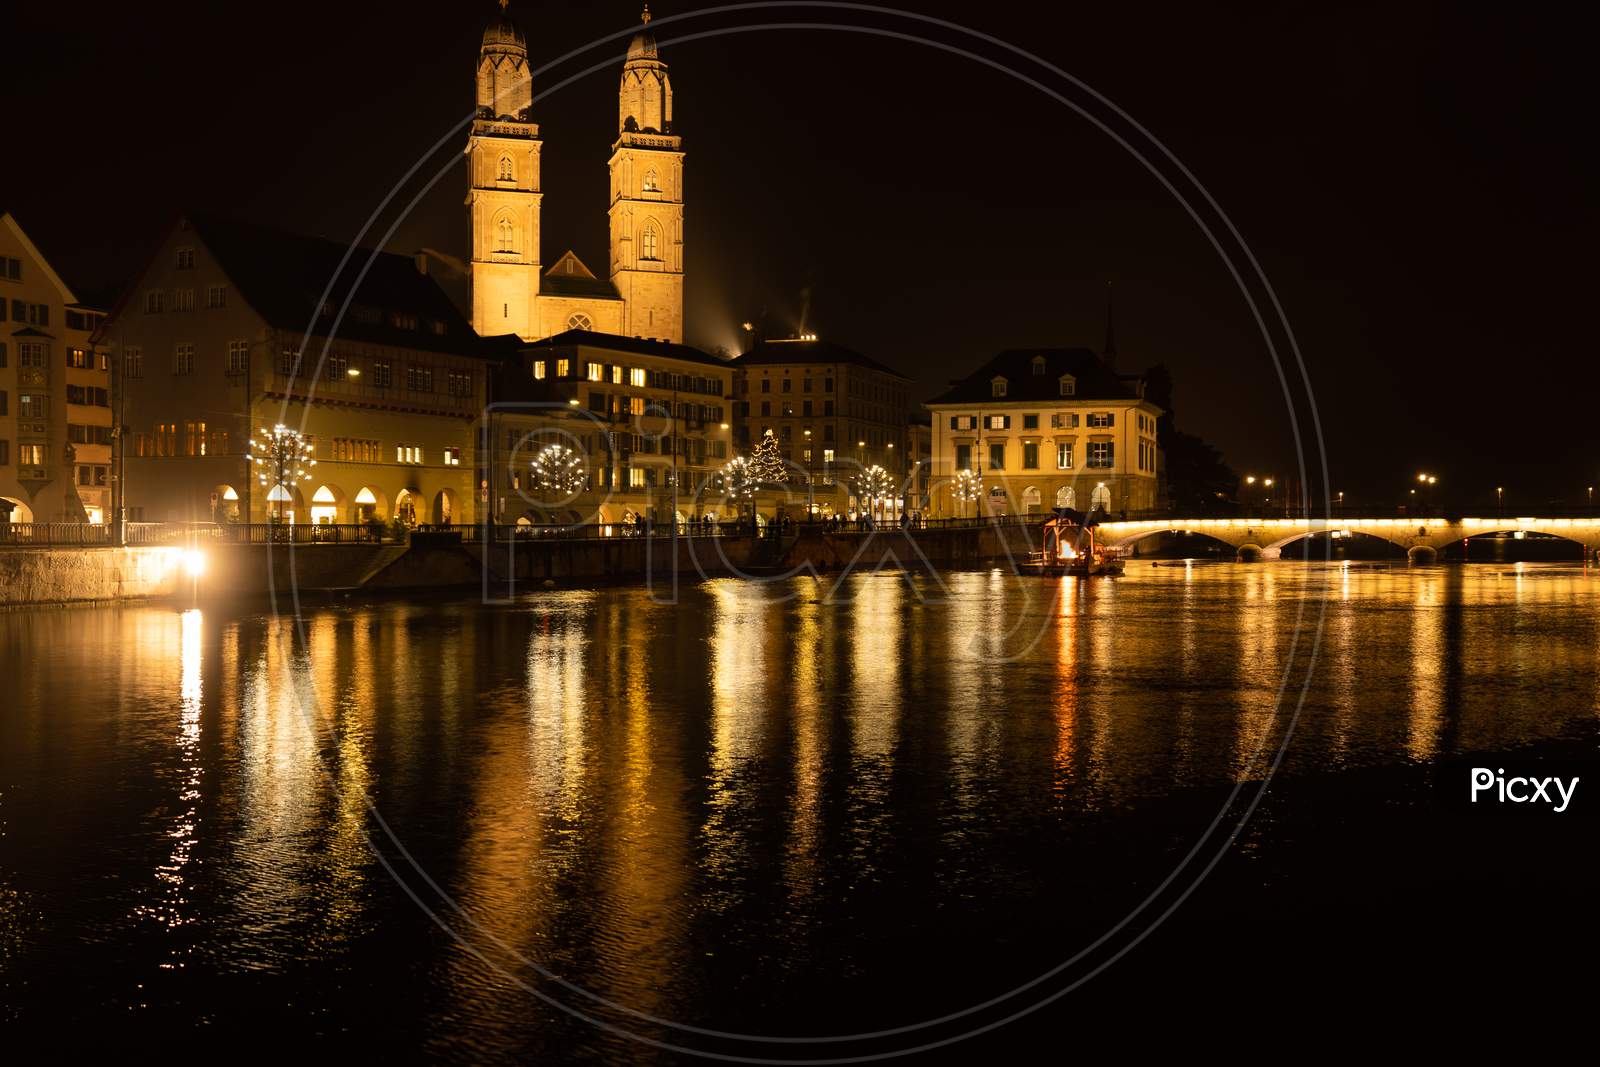 Major Church Grossmünster In Old Town Of Zurich Days Before Christmas.